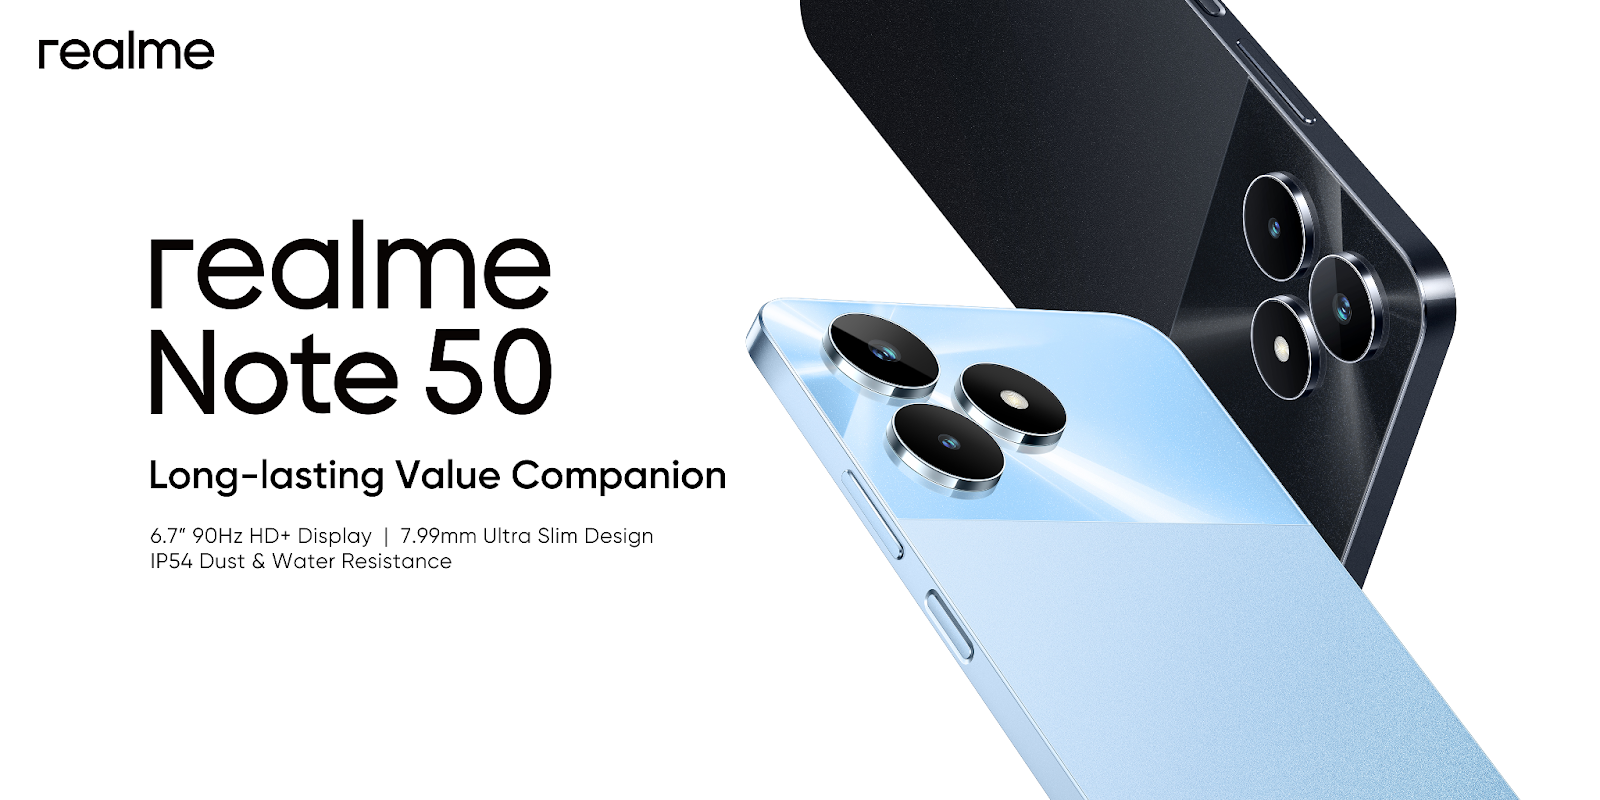 realme’s All-New Note Series introduced: Philippines as one of the first countries to launch realme Note 50